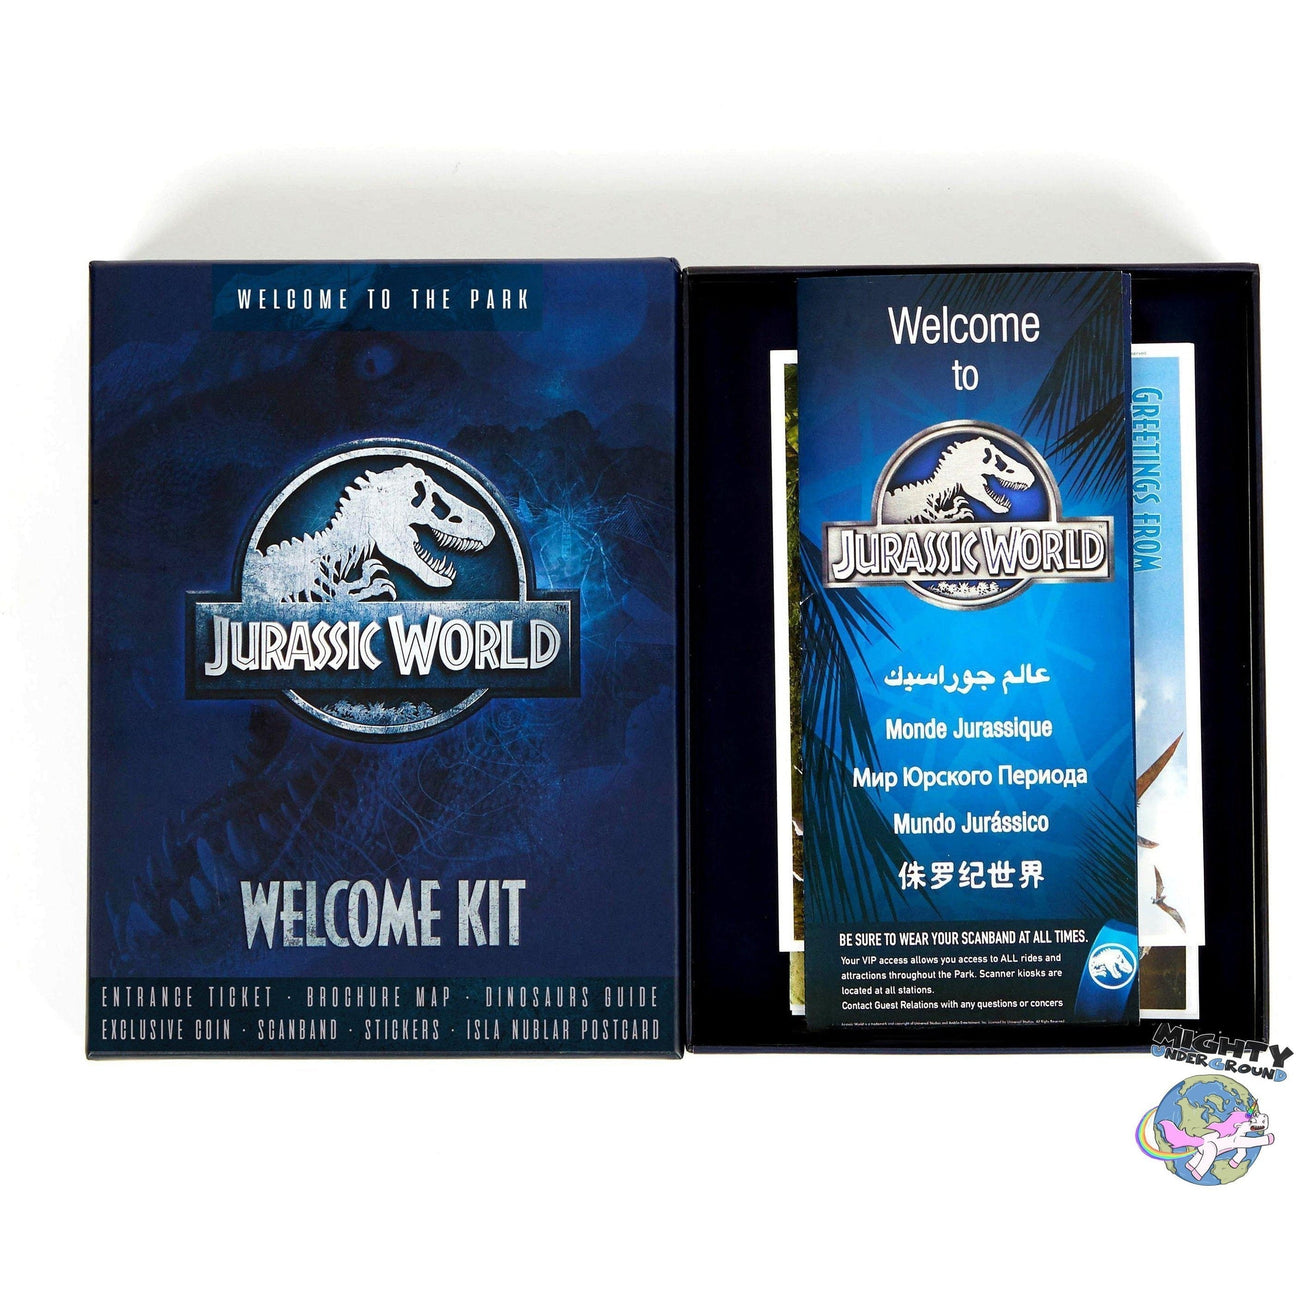 Jurassic World: Welcome Kit-Replik-Dr. Collector-mighty-underground